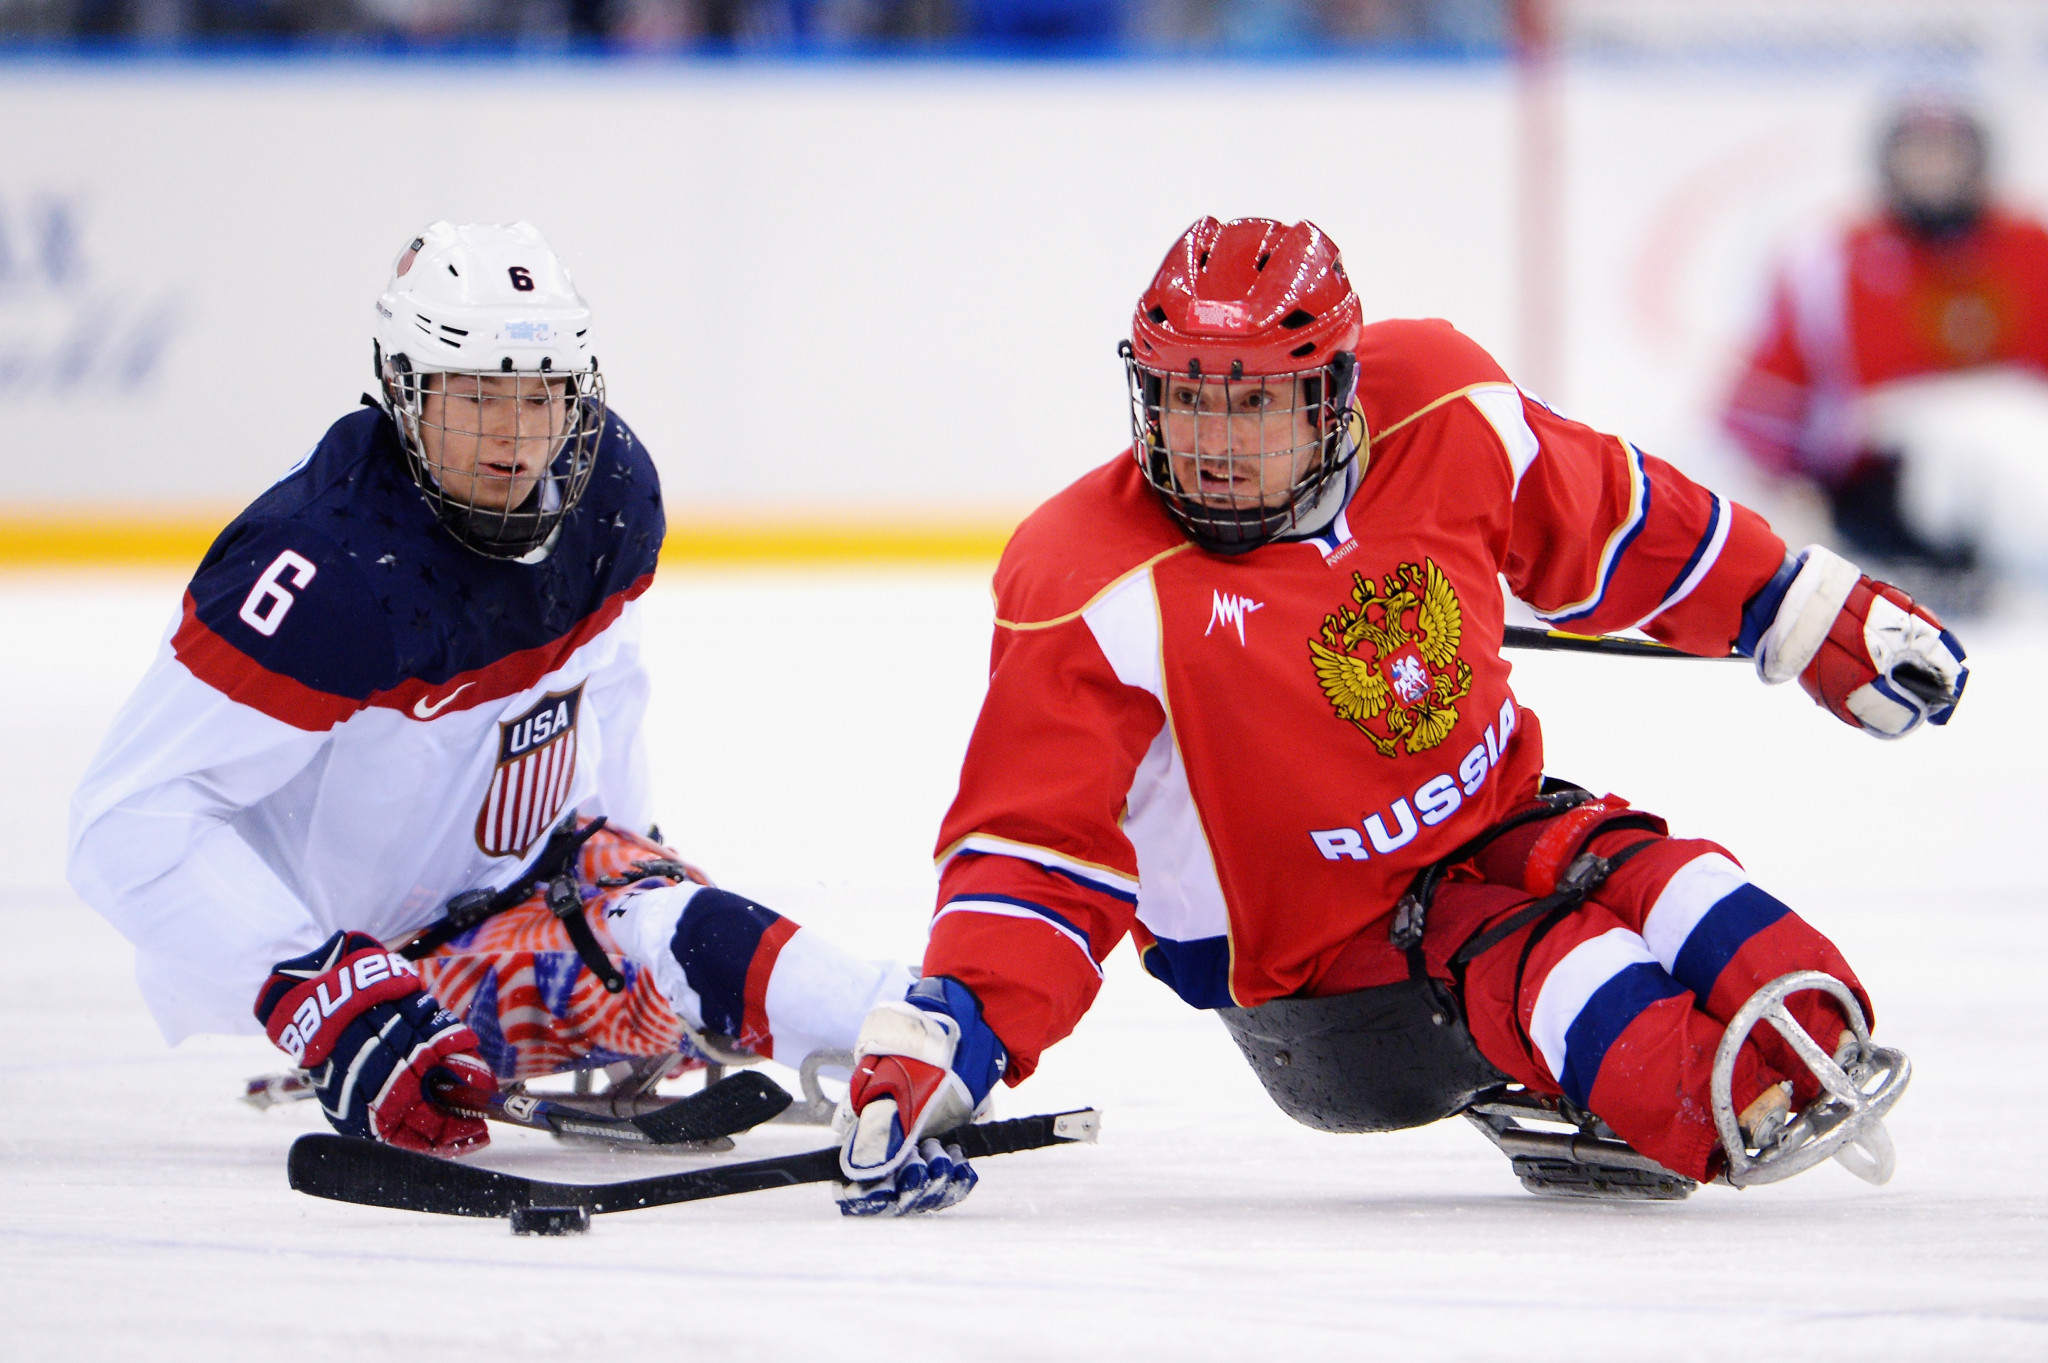 Eighteen month ban for Sochi 2014 Para ice hockey medallist Shikhov after doping violation